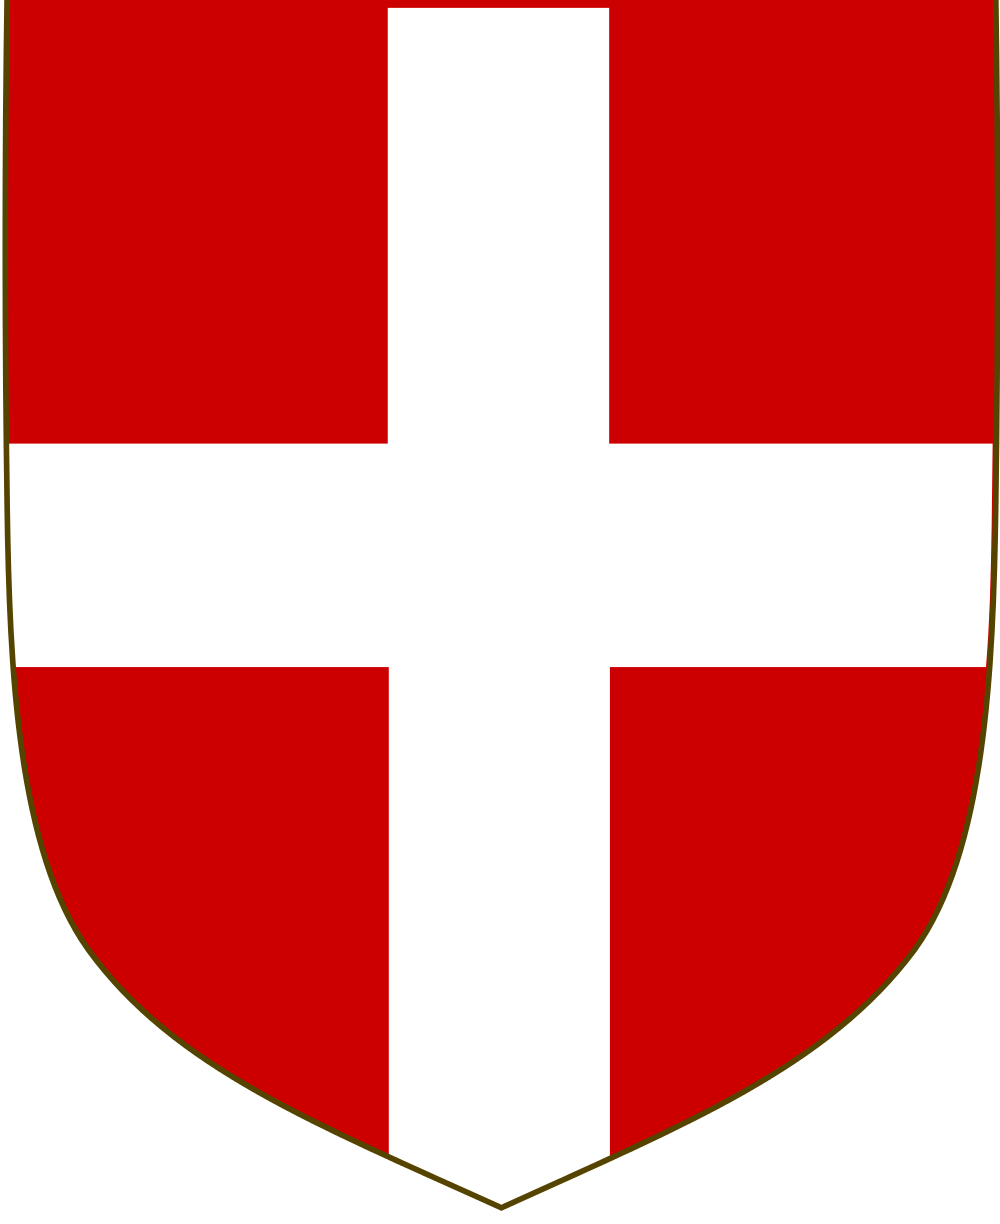 Red Cross in Shield Logo - File talk:Arms of the House of Savoy.svg